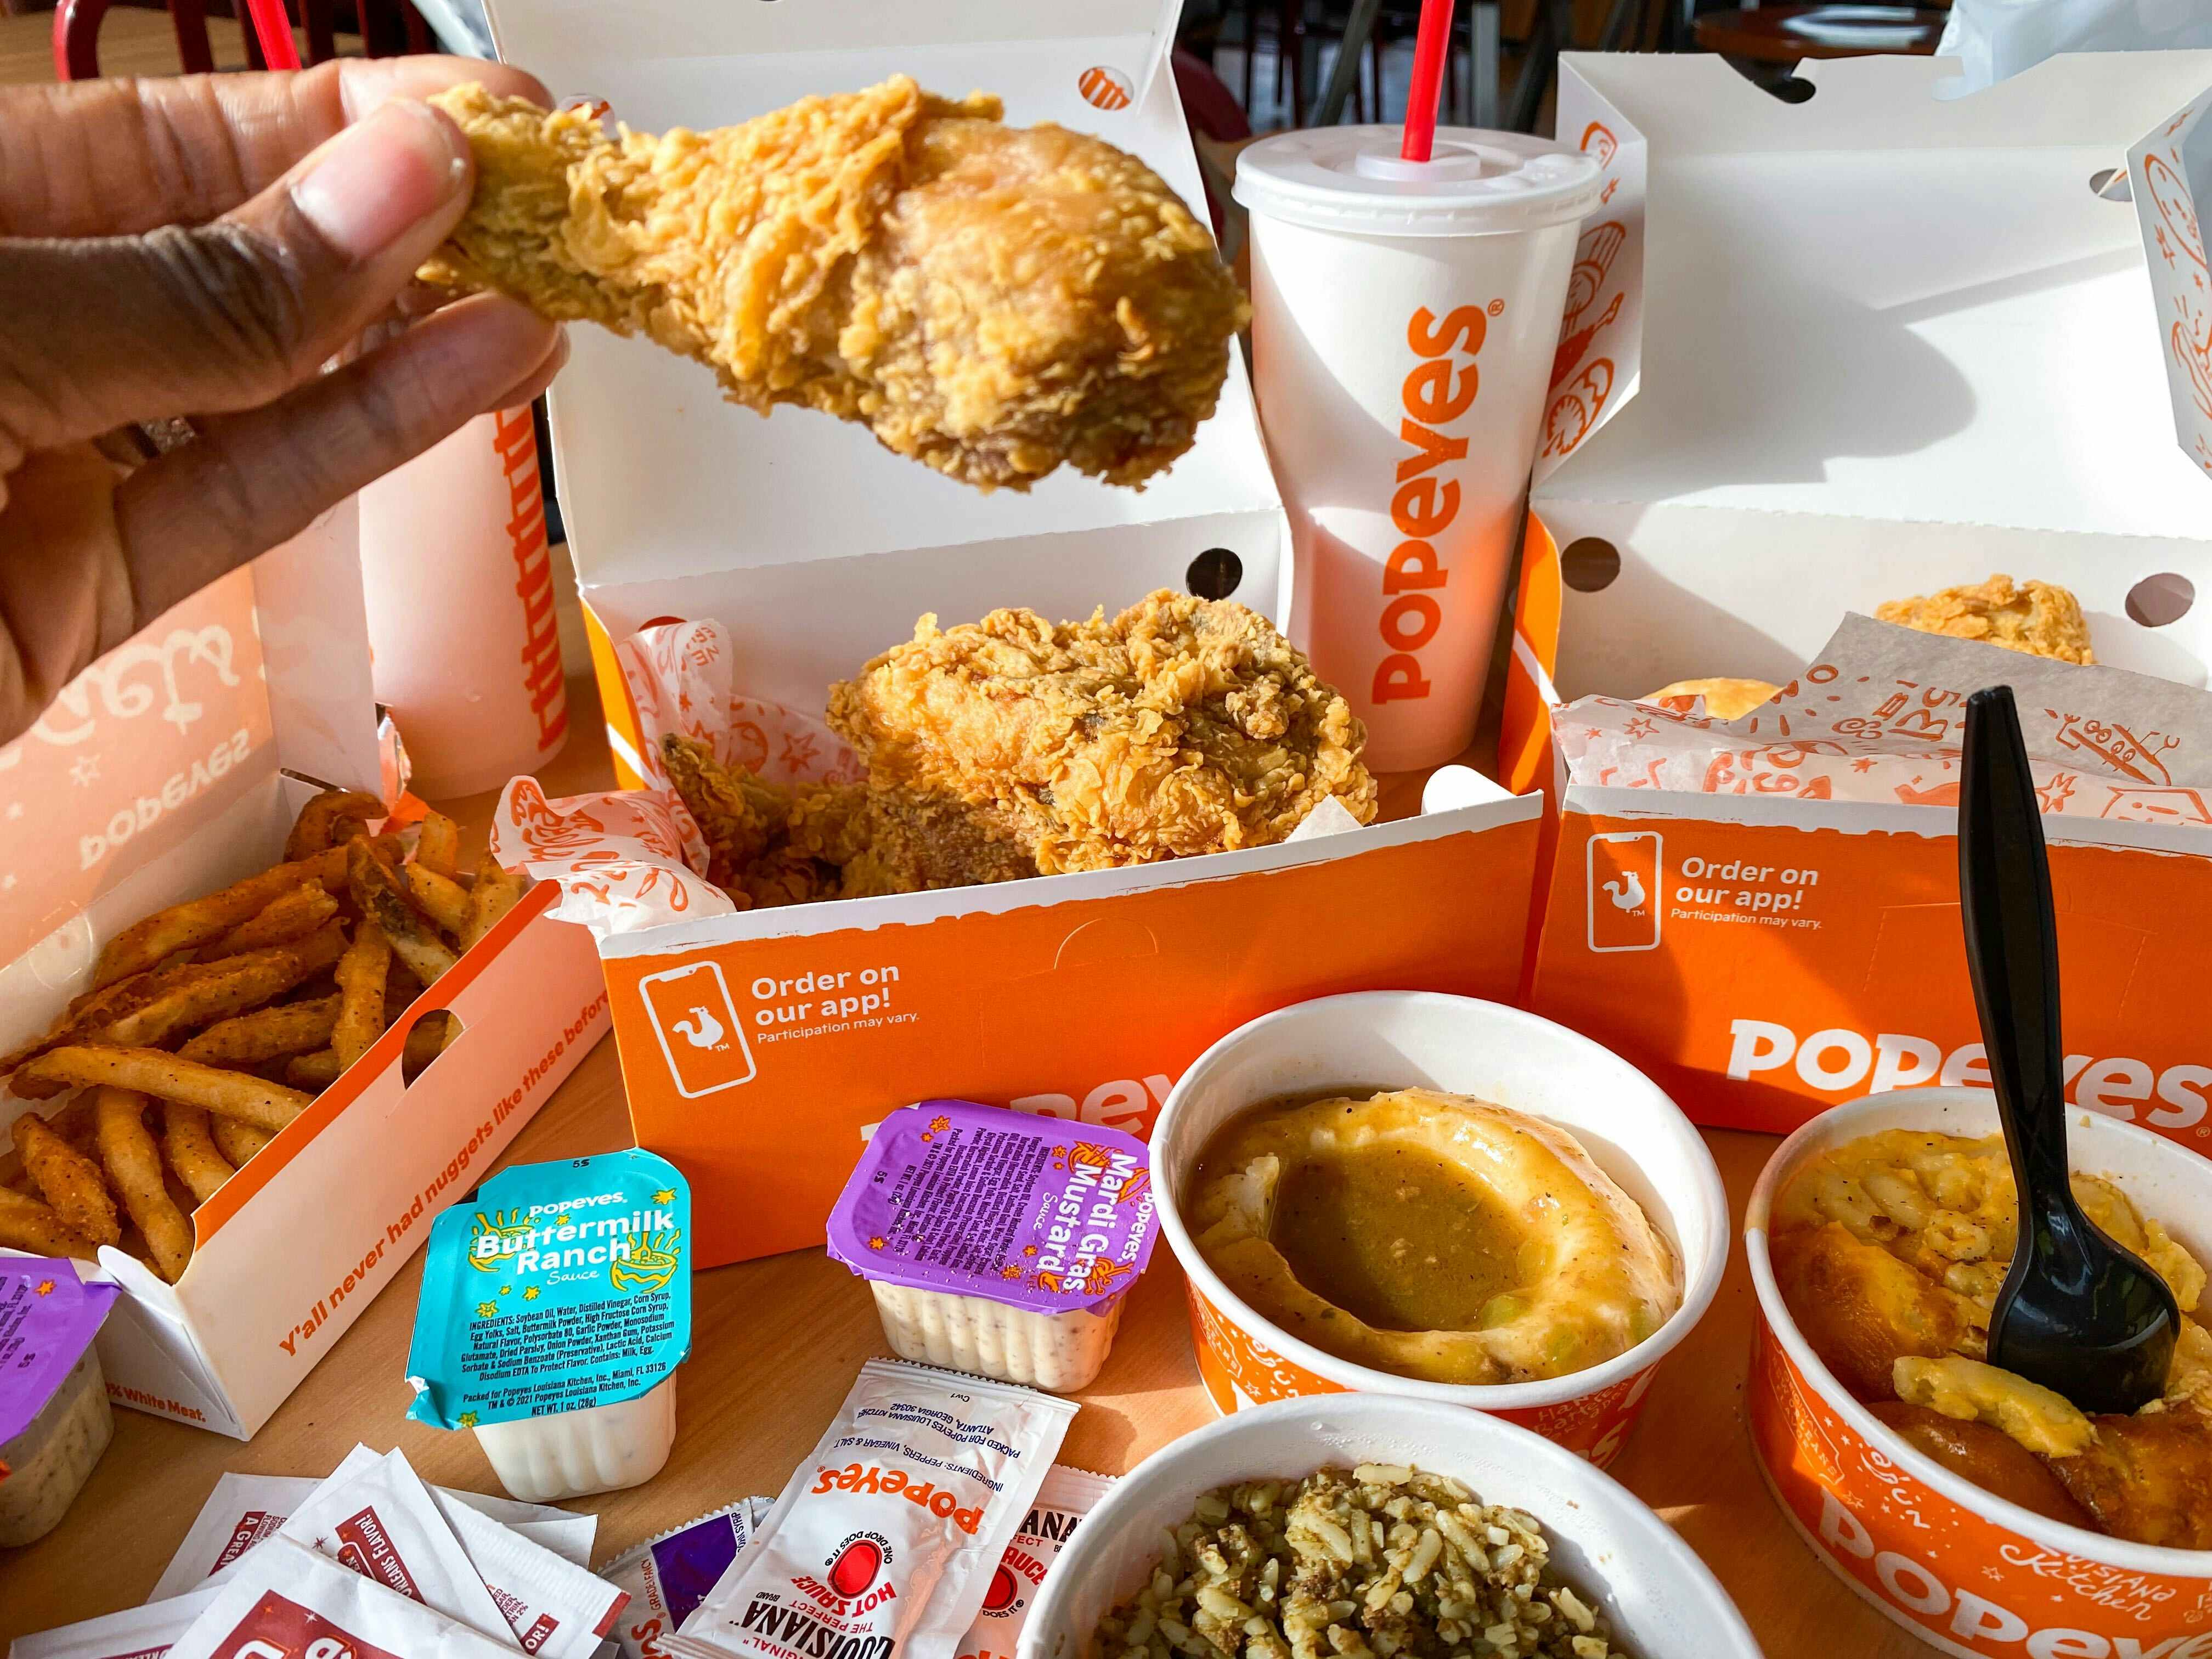 A person's hand holding up a piece of chicken above a Popeyes chicken family meal displayed on a table at Popeyes.